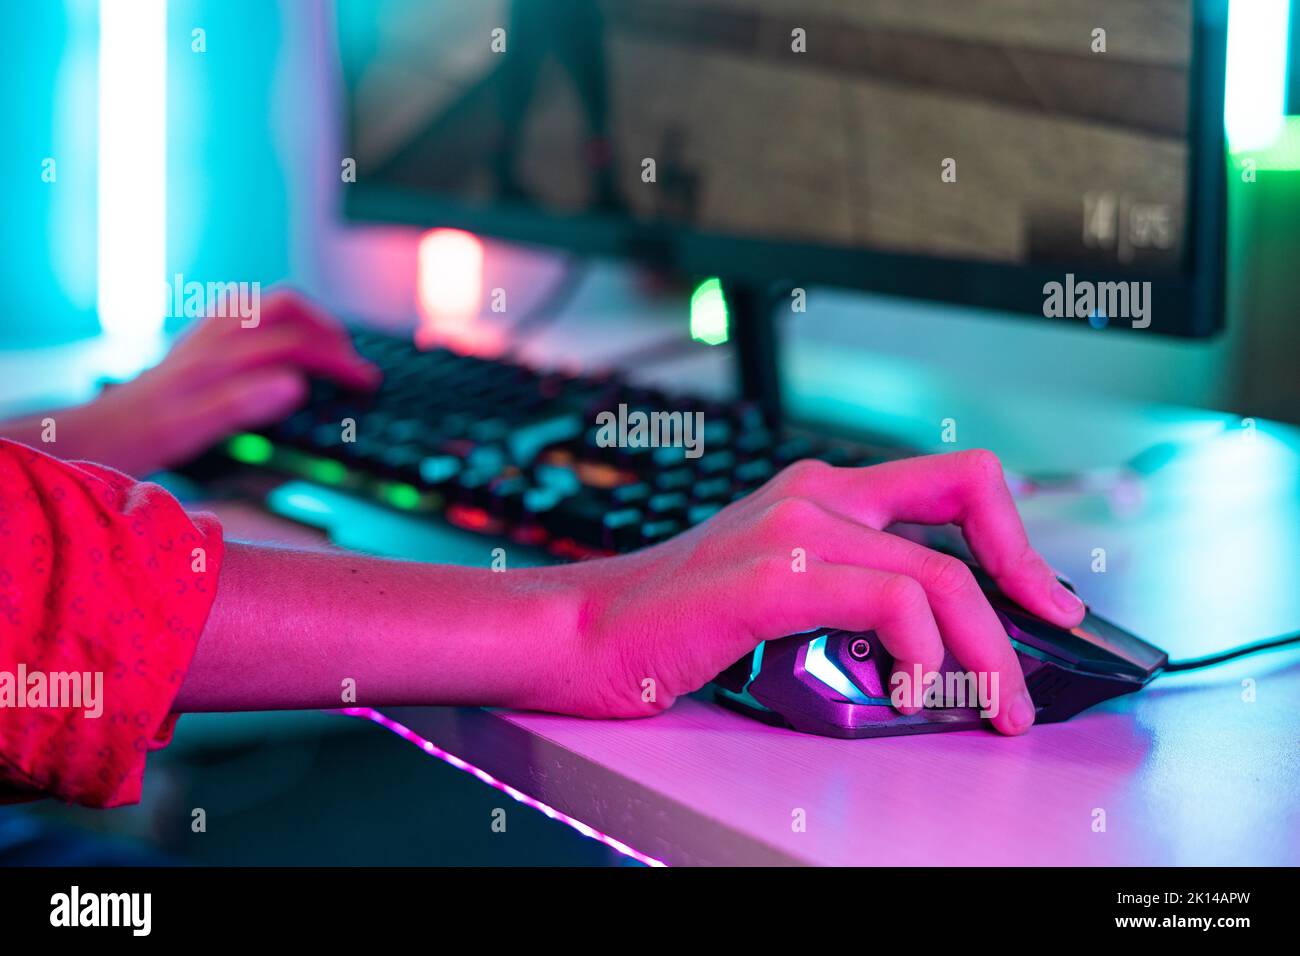 Close up shot of teenager kid hands using mouse while playing video game at neon light background - concept of entertainment, hobbies and technology. Stock Photo